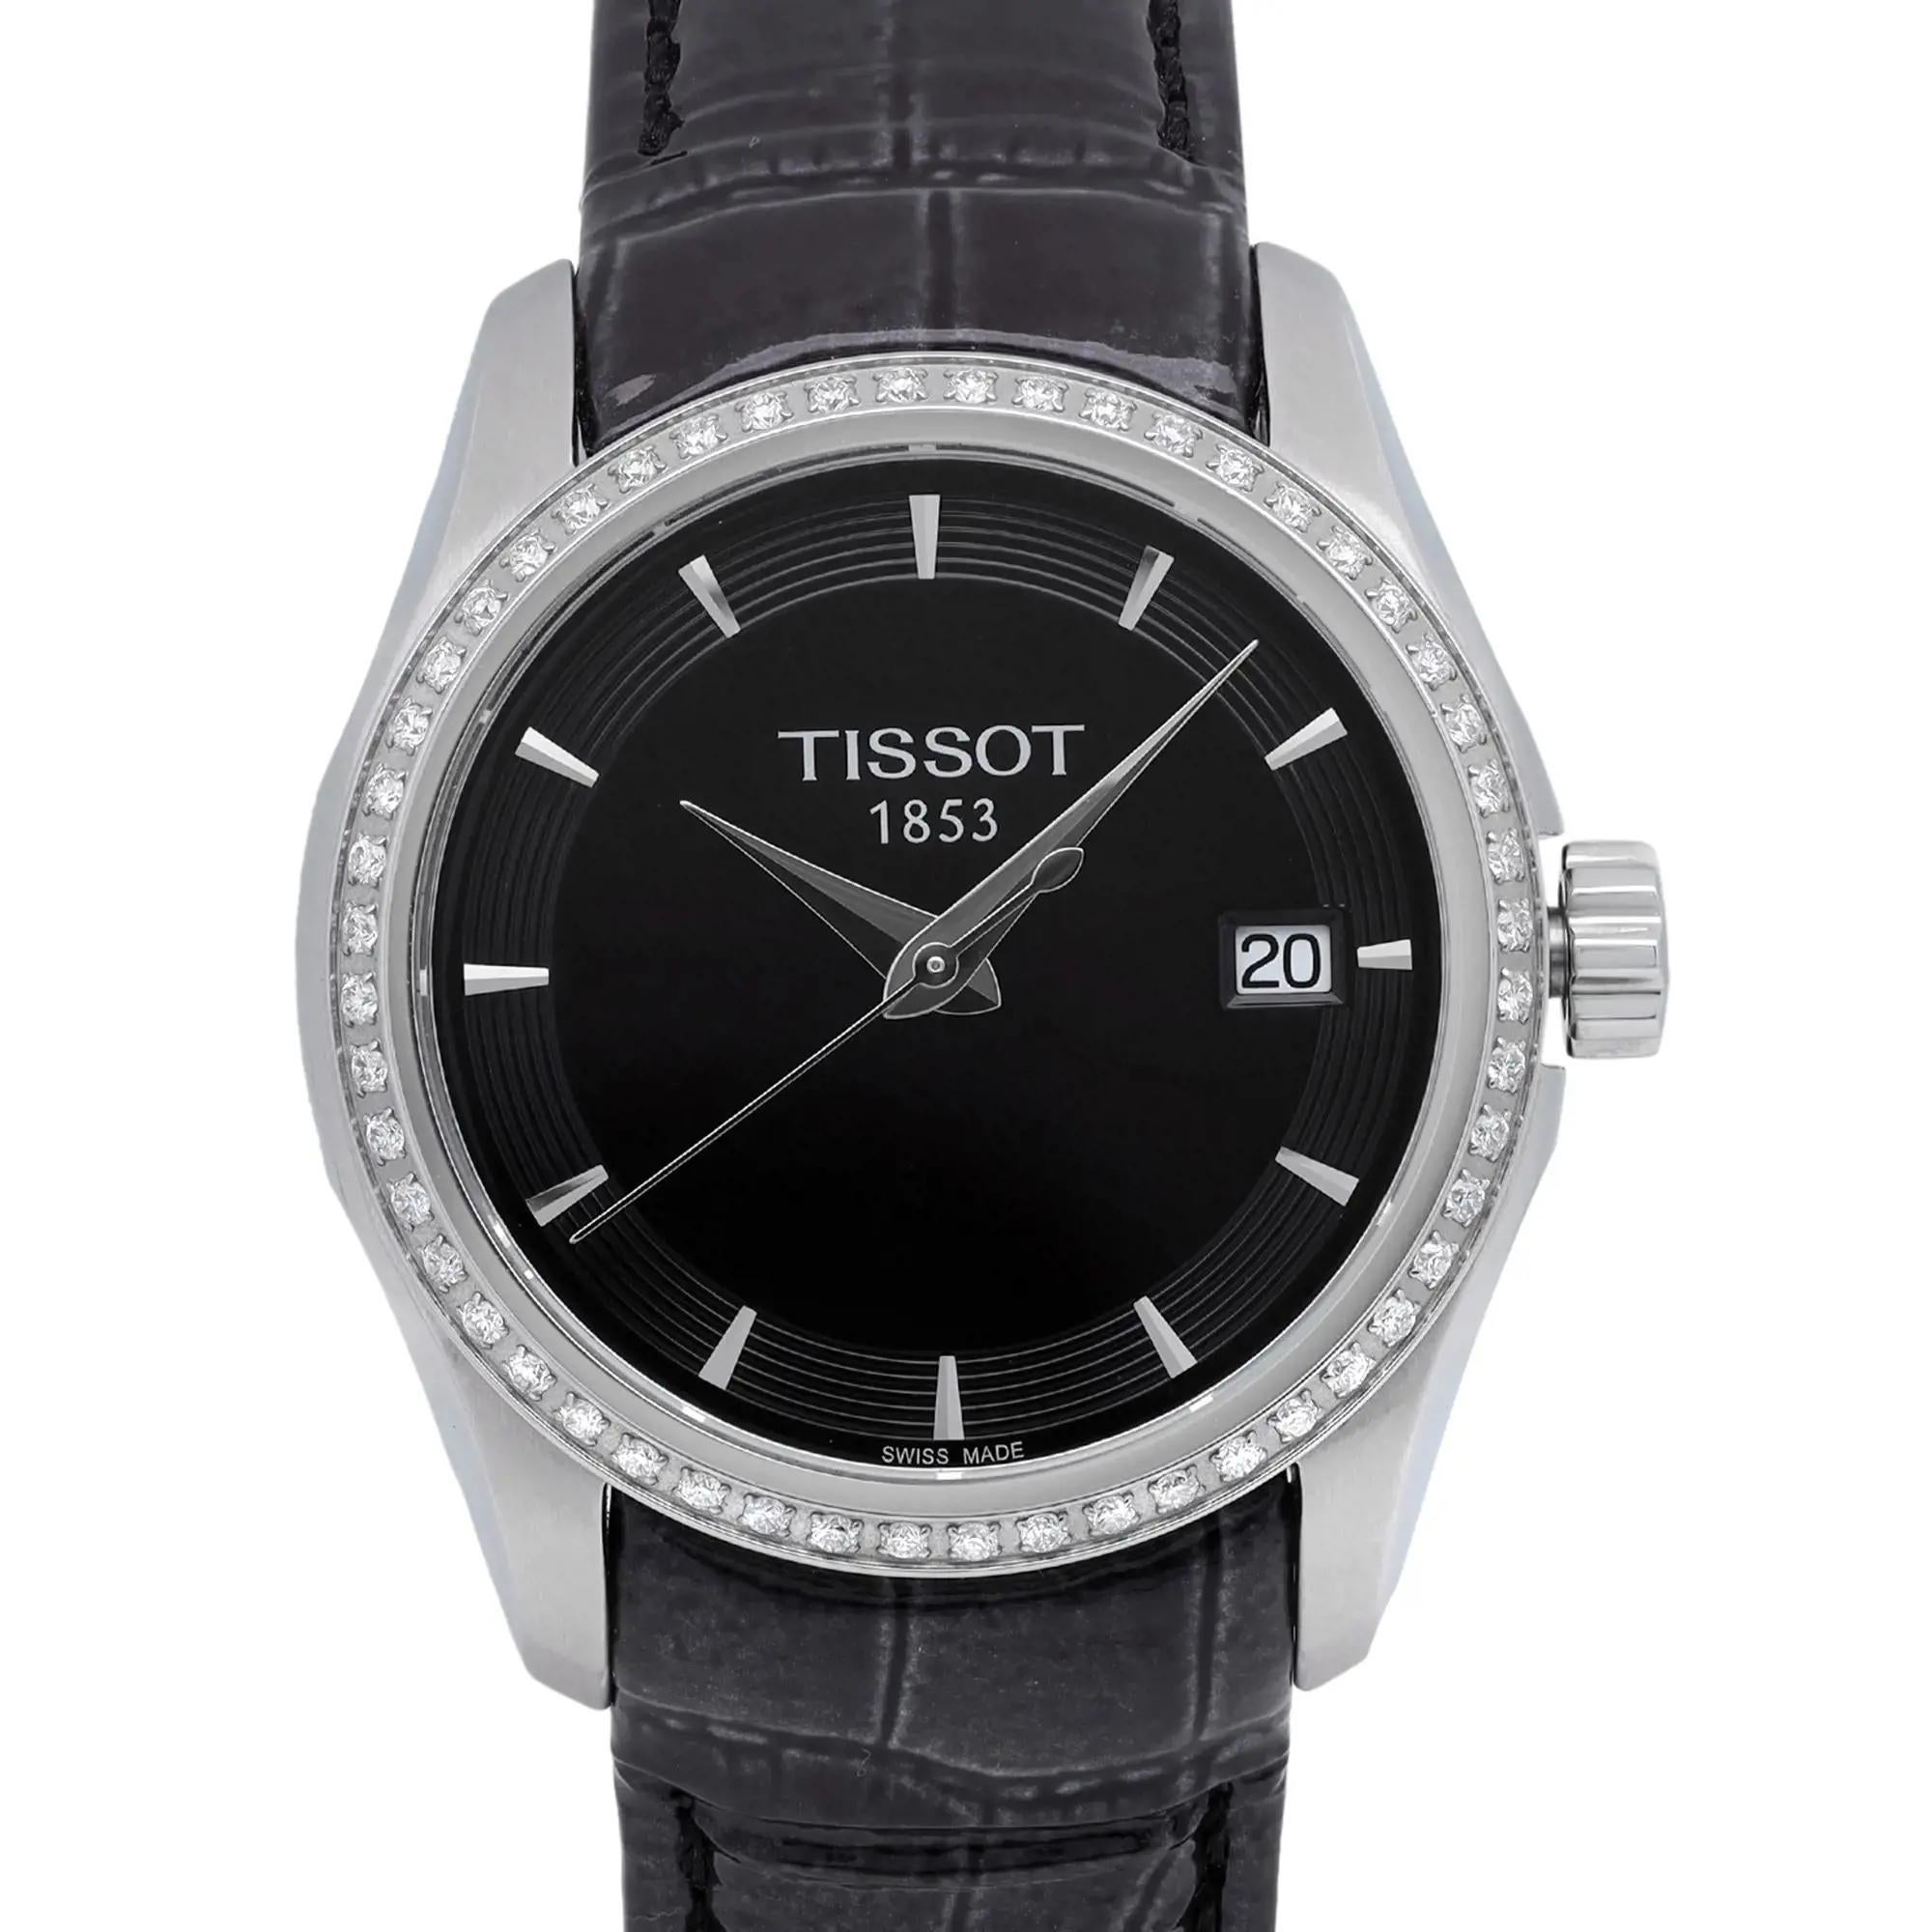 Unworn. Original box and papers are included. MSRP $1595

 Brand: Tissot  Type: Wristwatch  Department: Women  Model Number: T035.210.66.051.00  Country/Region of Manufacture: Switzerland  Style: Dress/Formal  Model: Tissot Couturier  Vintage: No 